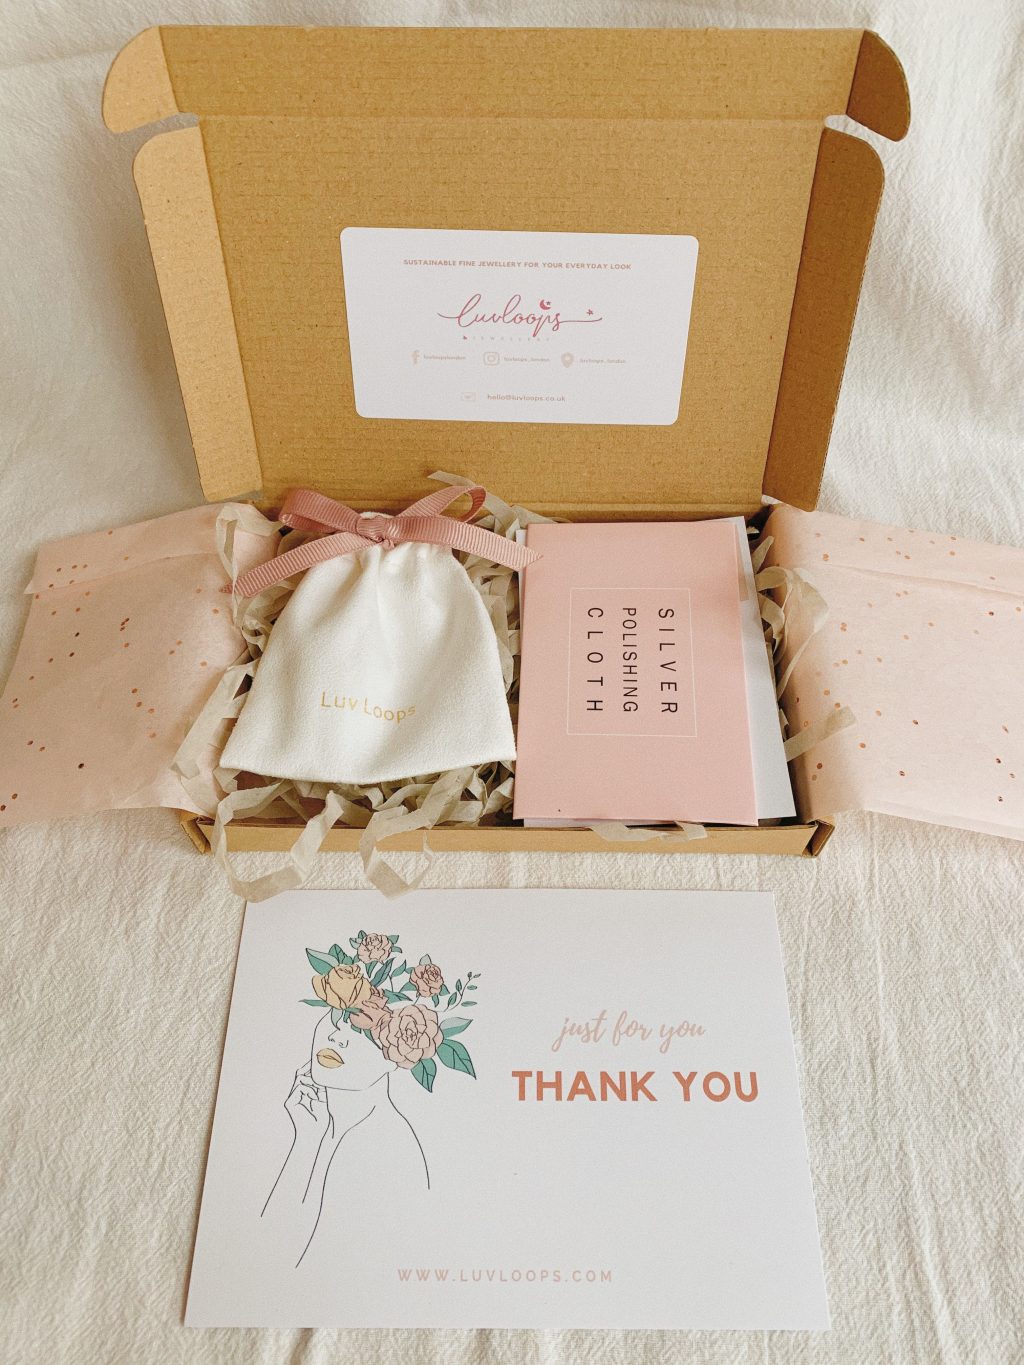 20 Packaging Ideas for Small Businesses - Wonder Forest